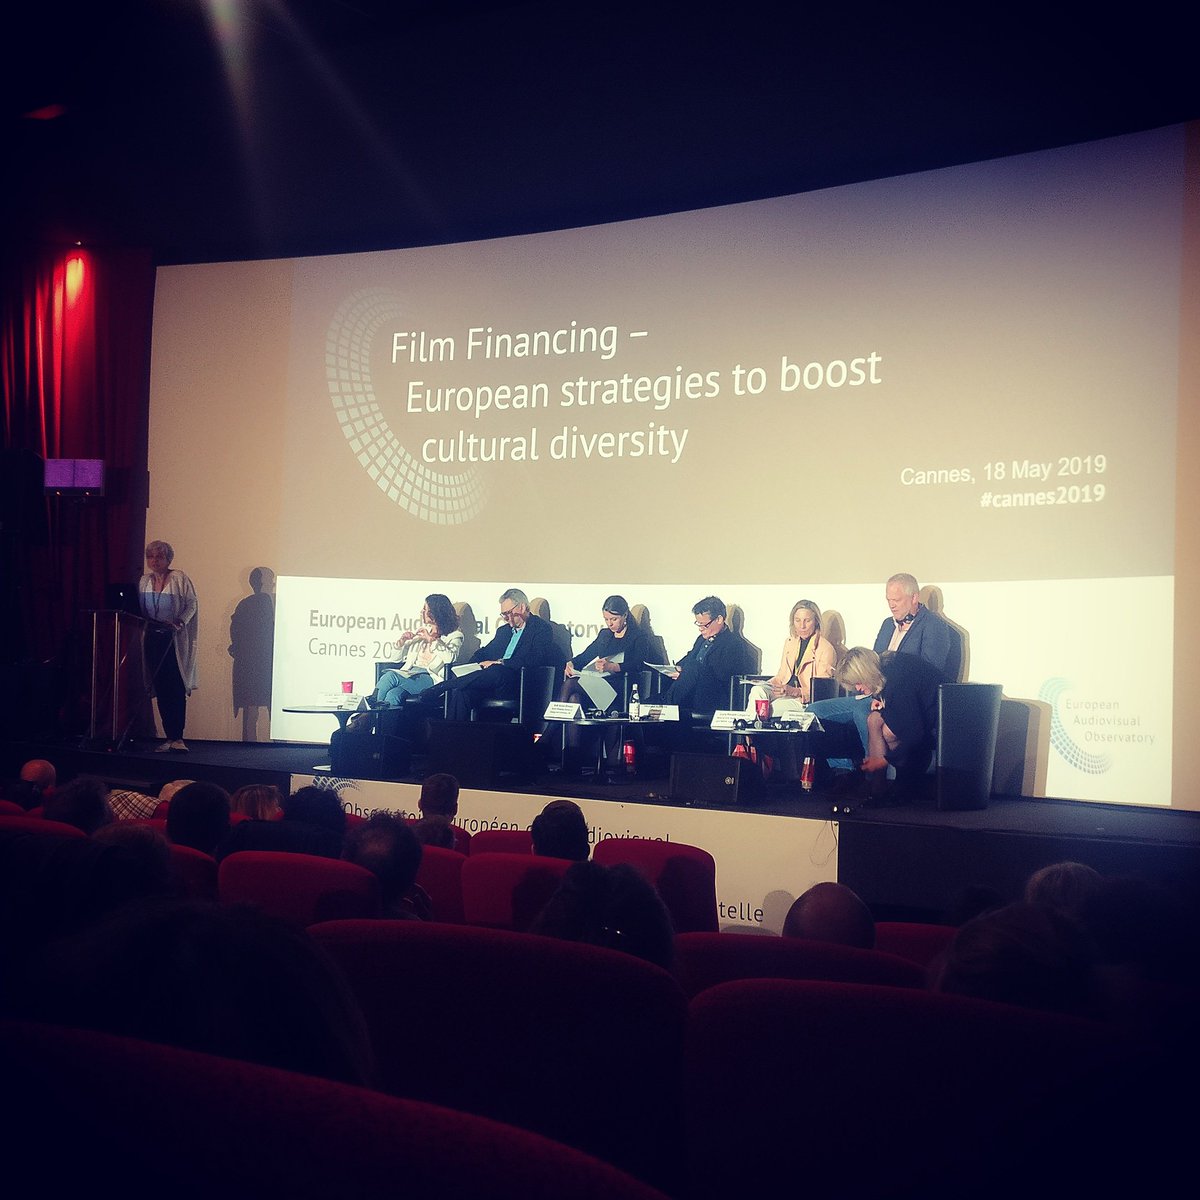 Possibly everything about film financing thanks to the #europeanaudiovisualobservatory #cannes2019 #rightnow